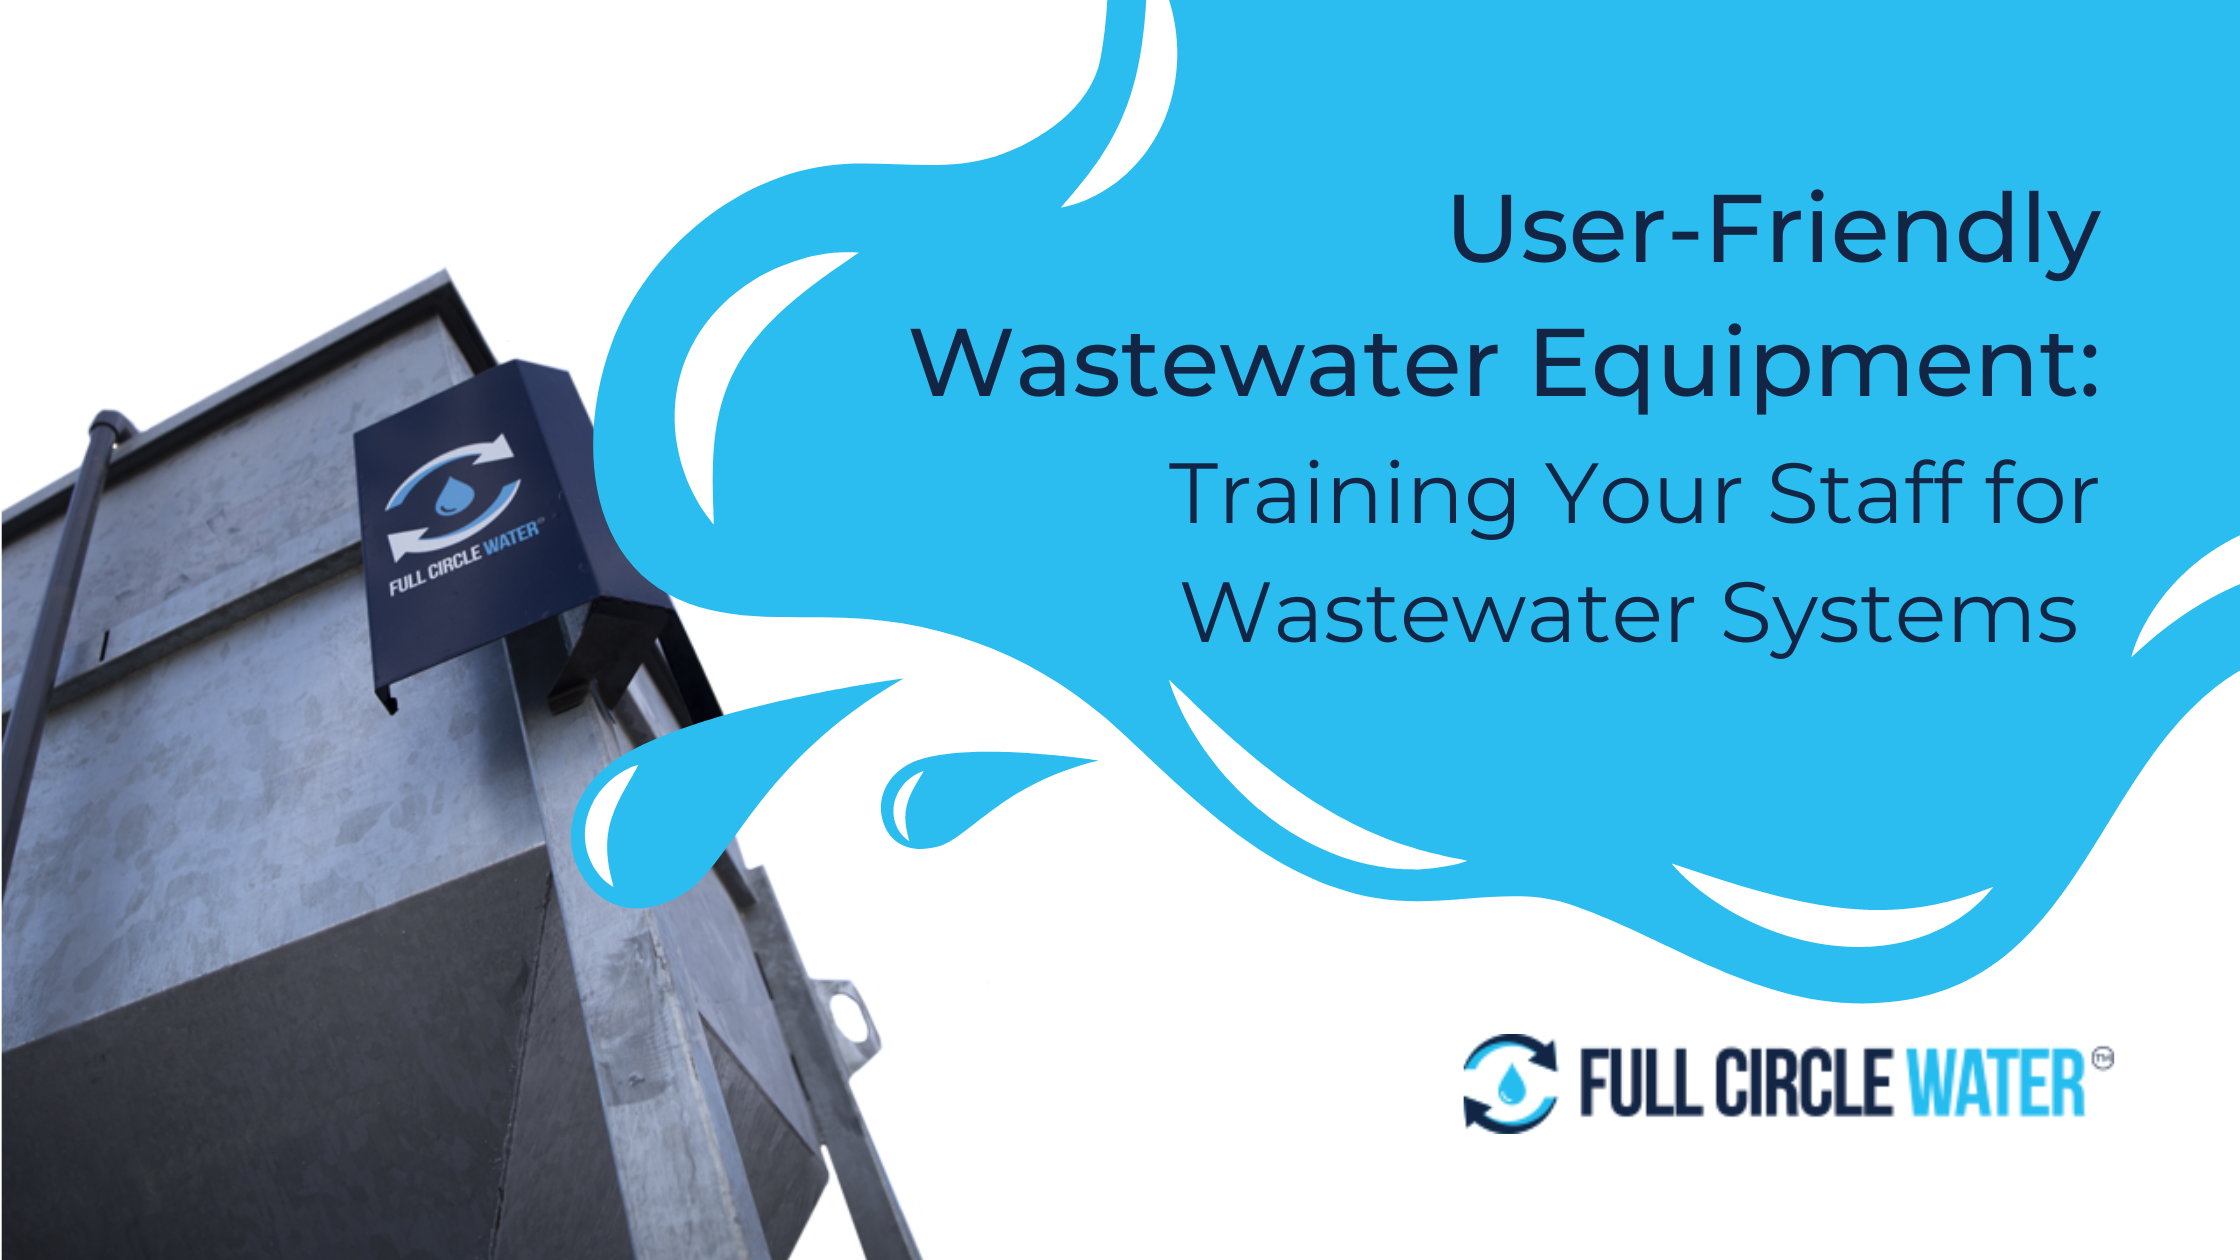 Featured image for “User-Friendly Wastewater Equipment: Training for Wastewater Systems”